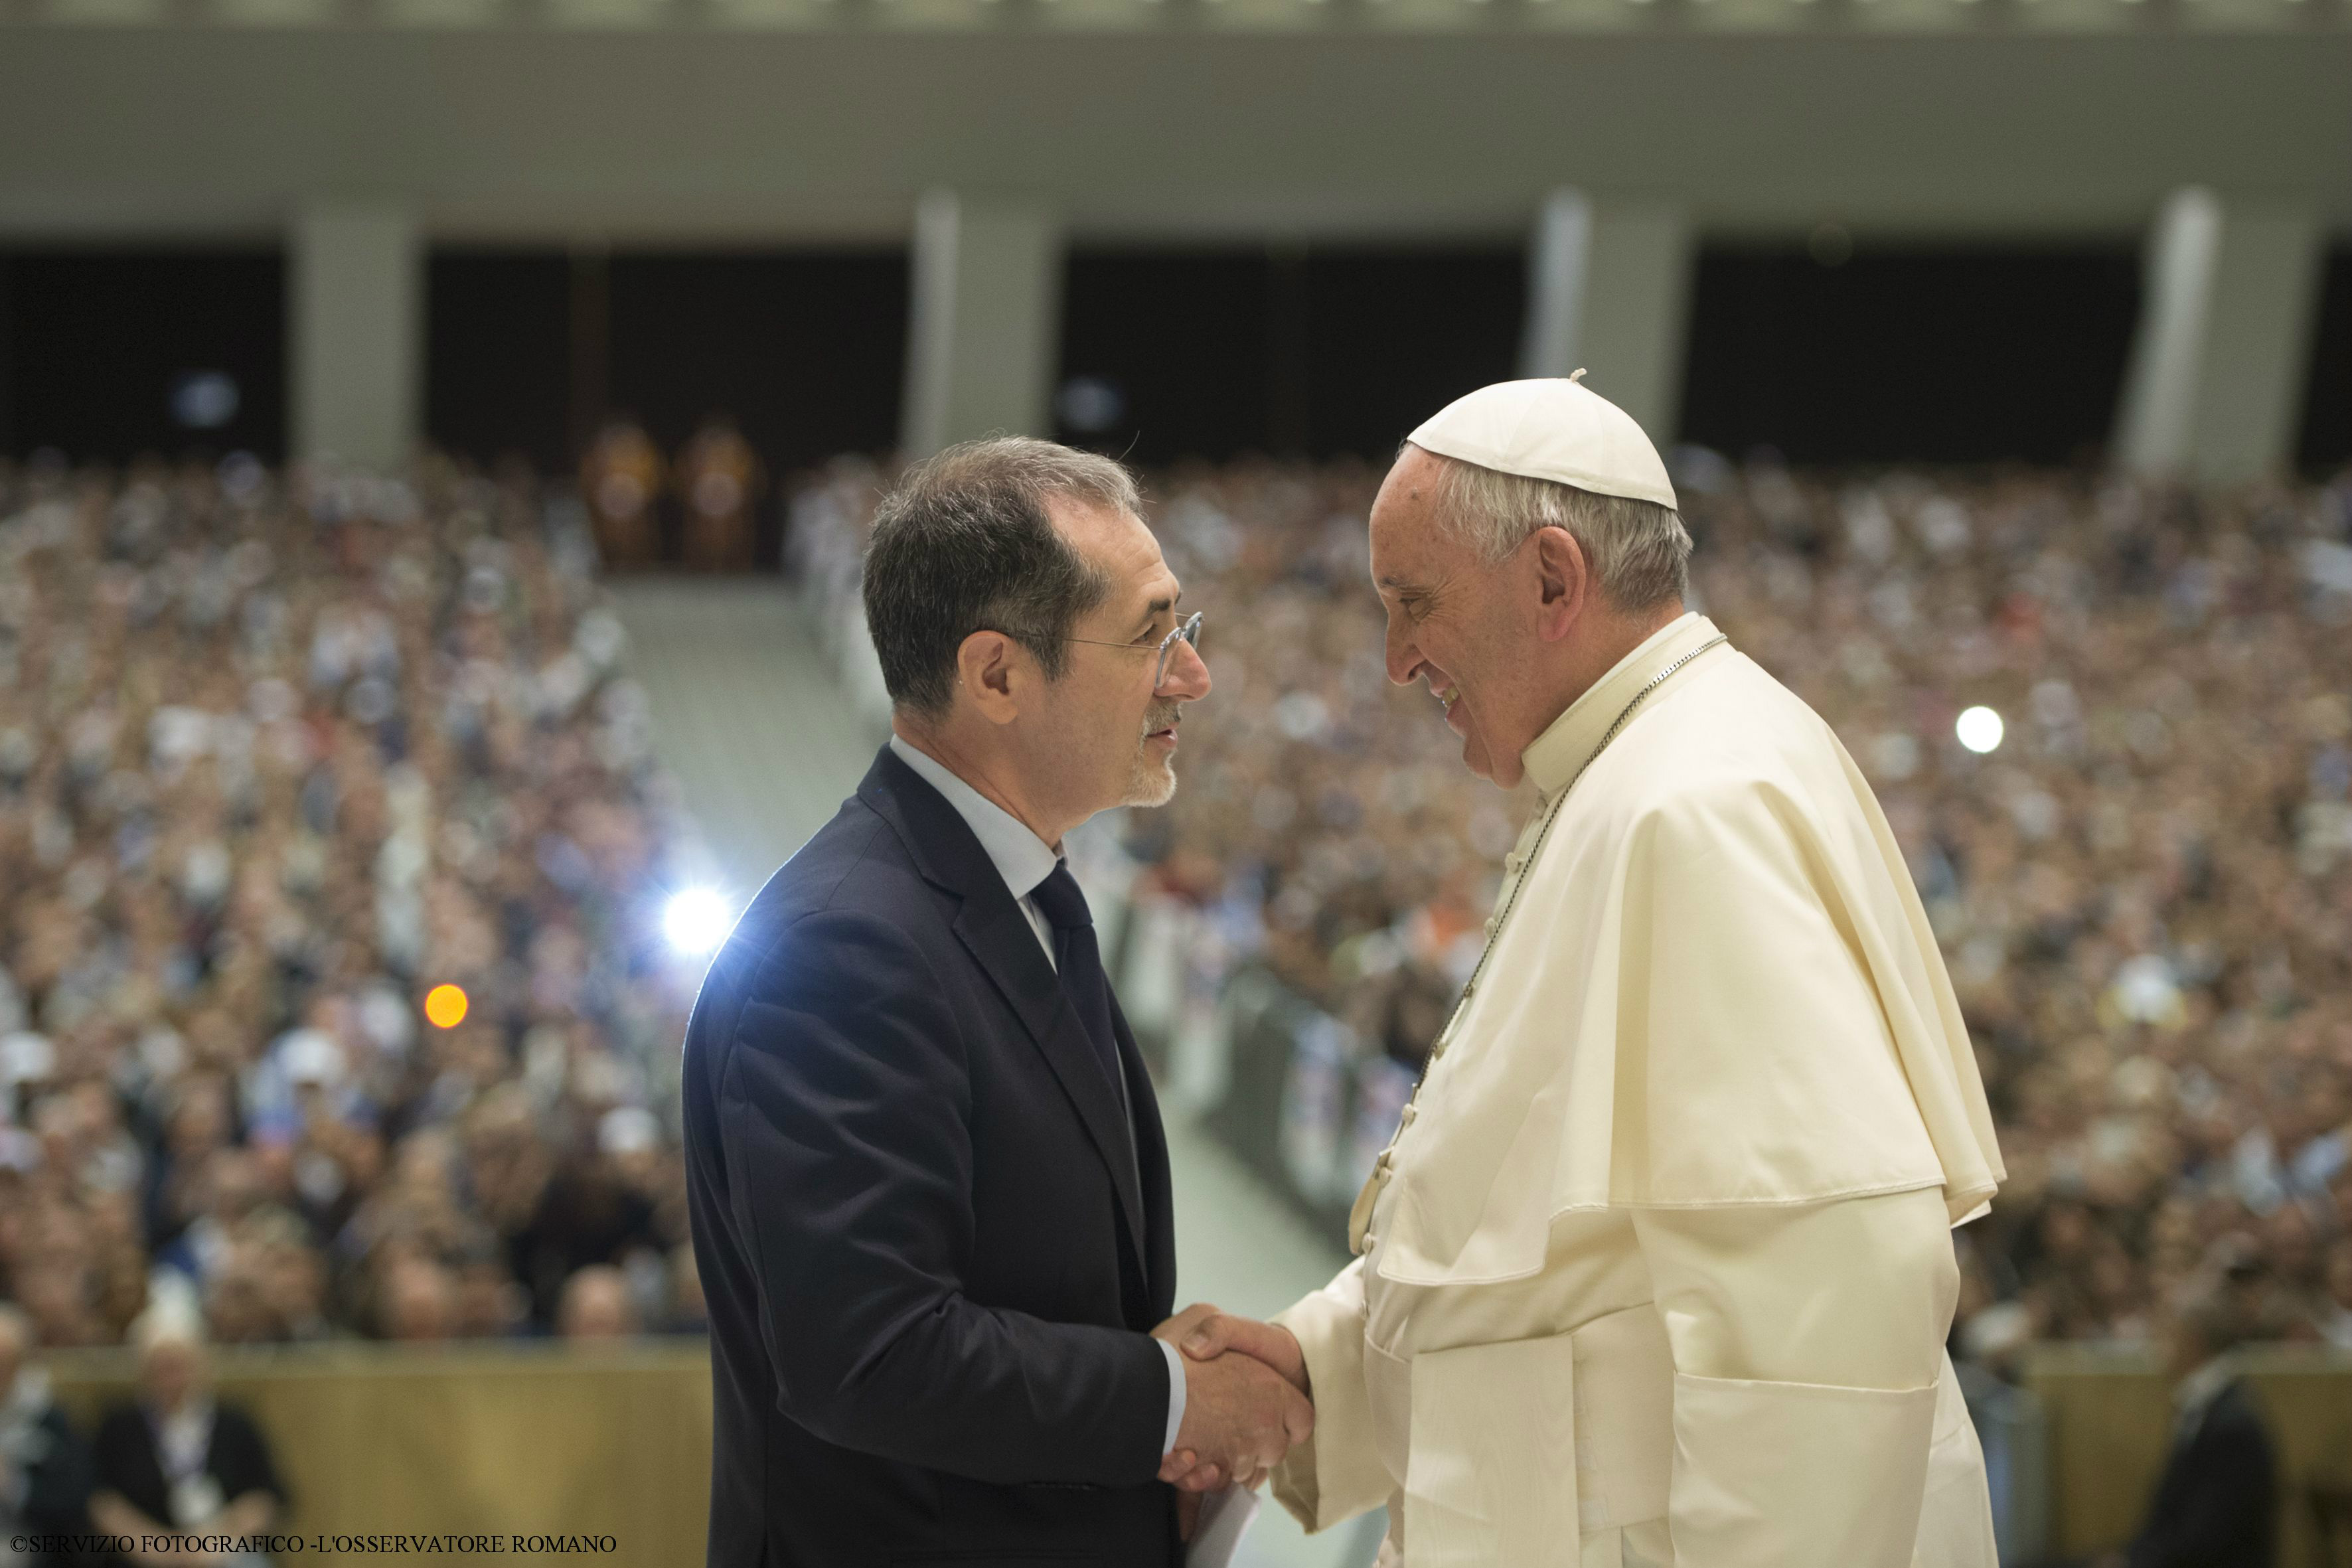 Pope Francis greets the national president of the ACLI